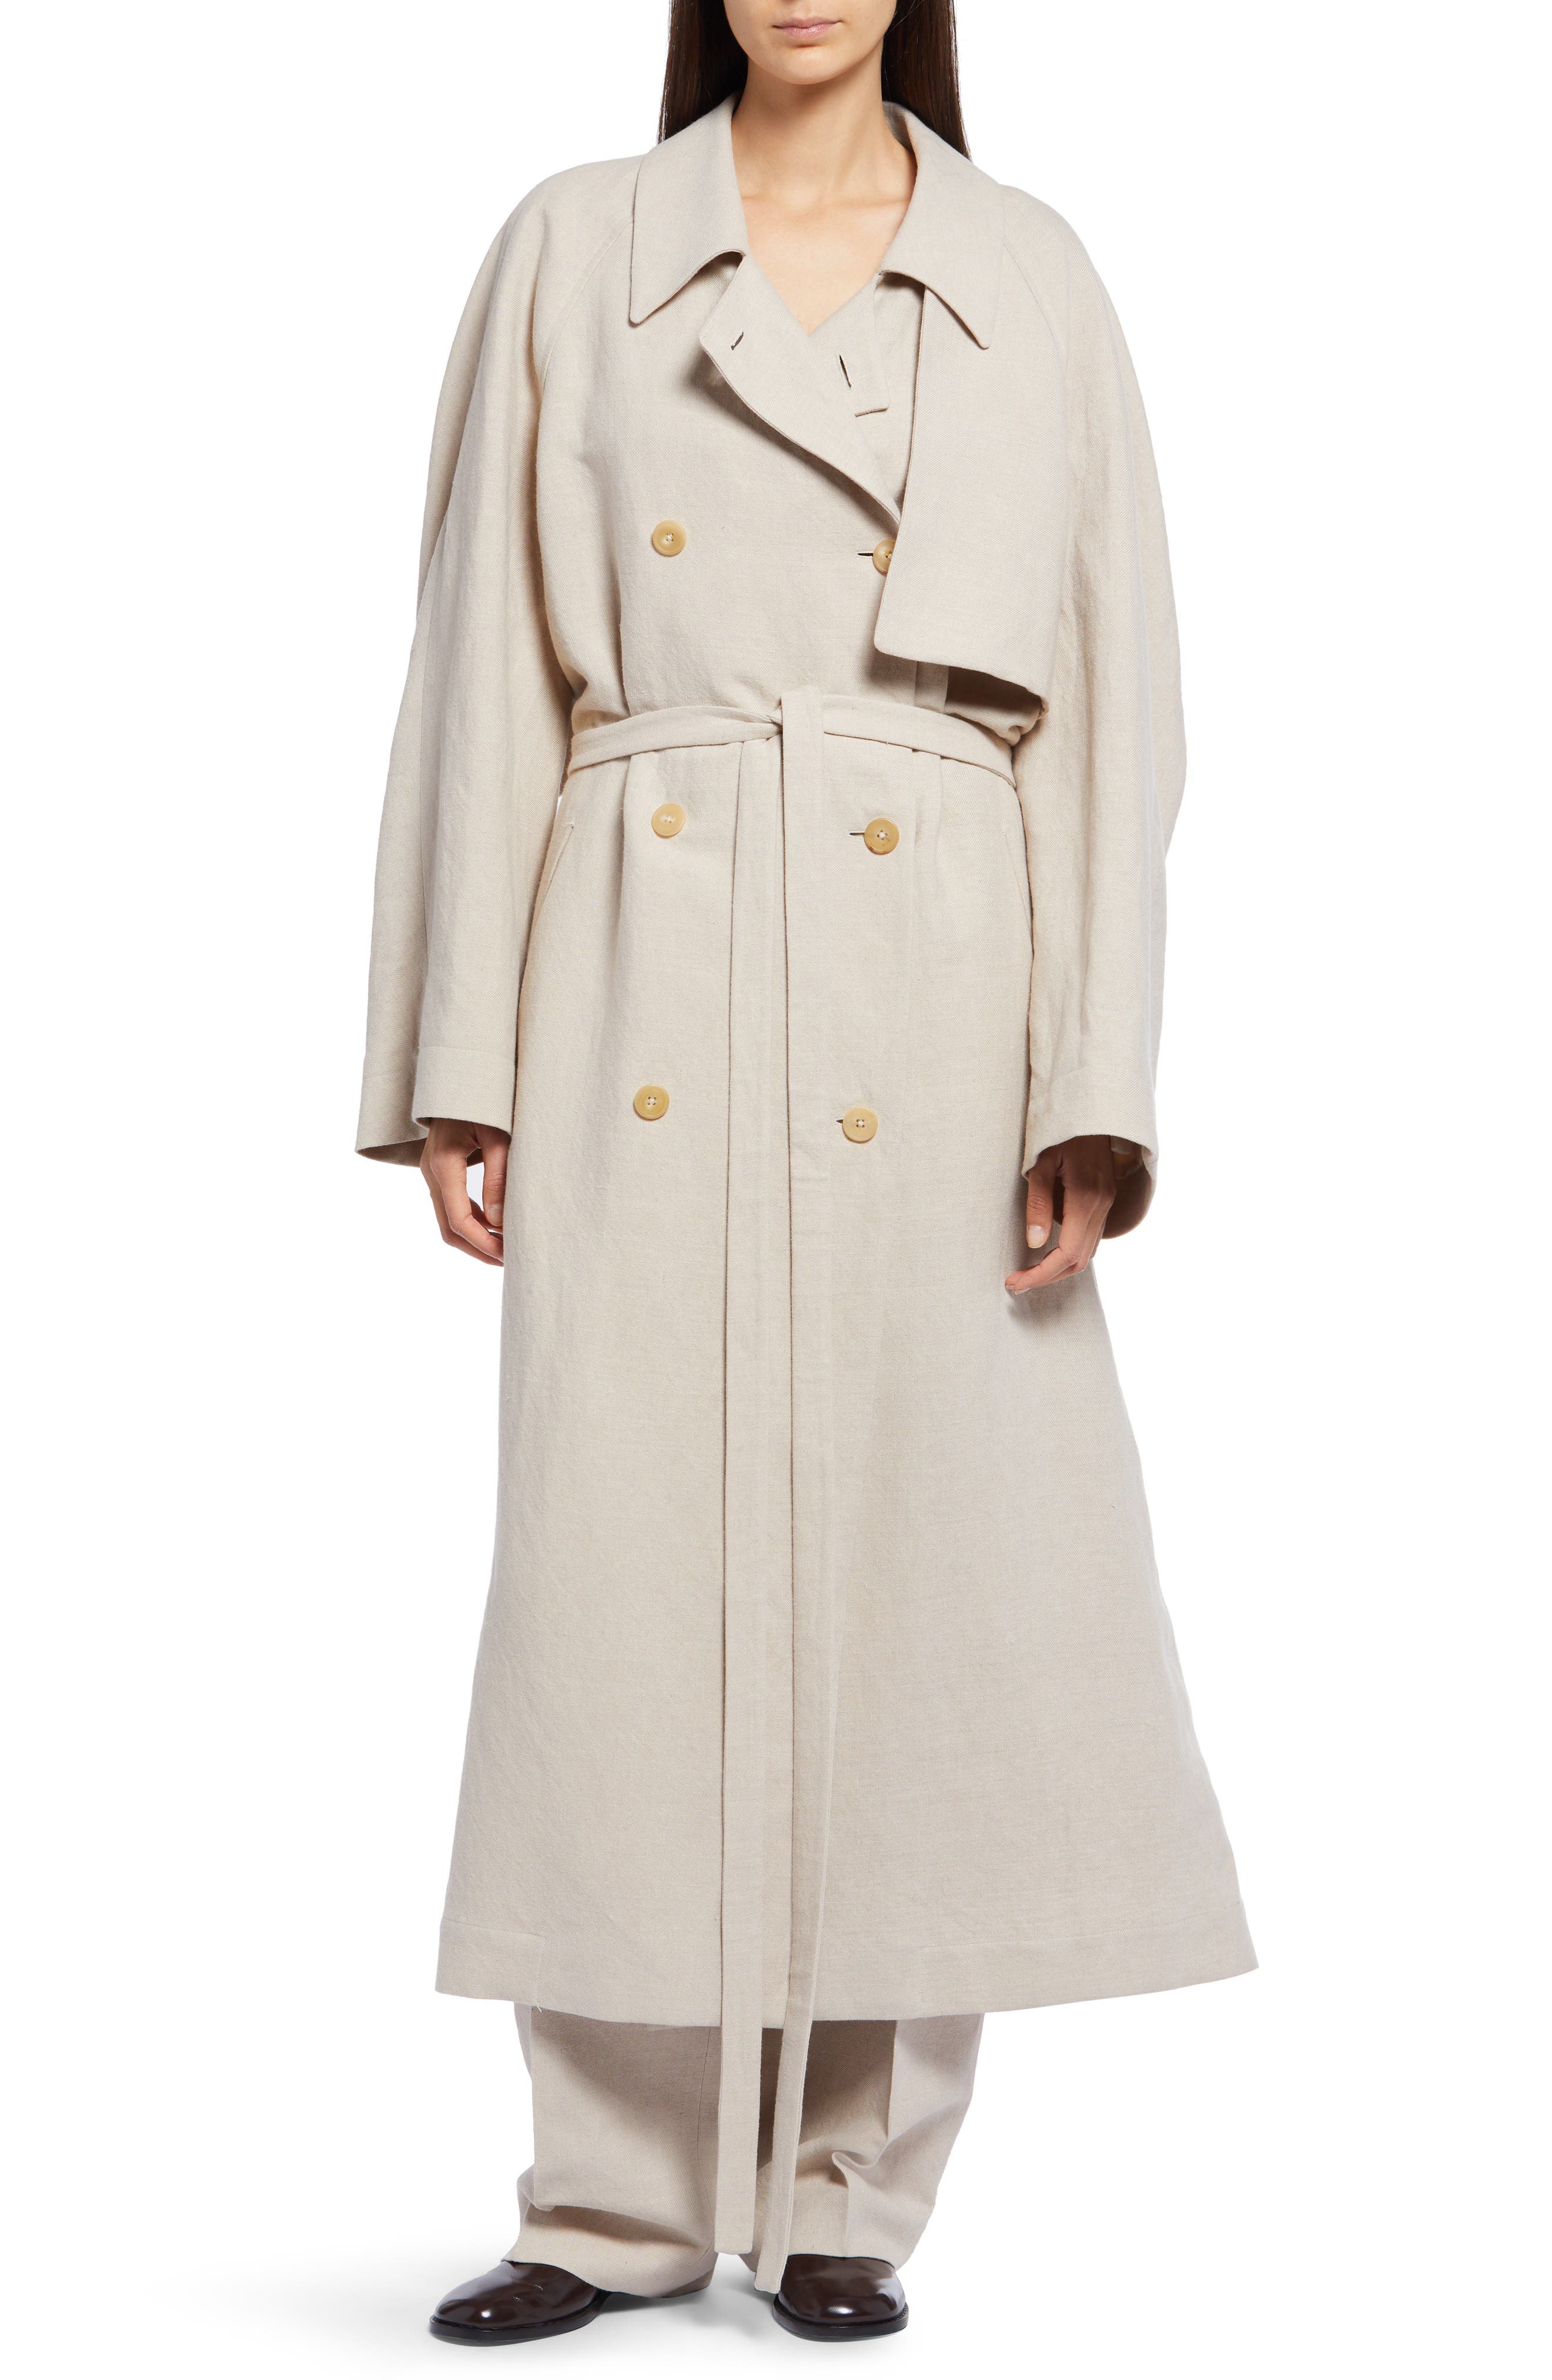 The Row Lucana Double Breasted Linen & Wool Blend Trench Coat in Sahara at Nordstrom, Size Small